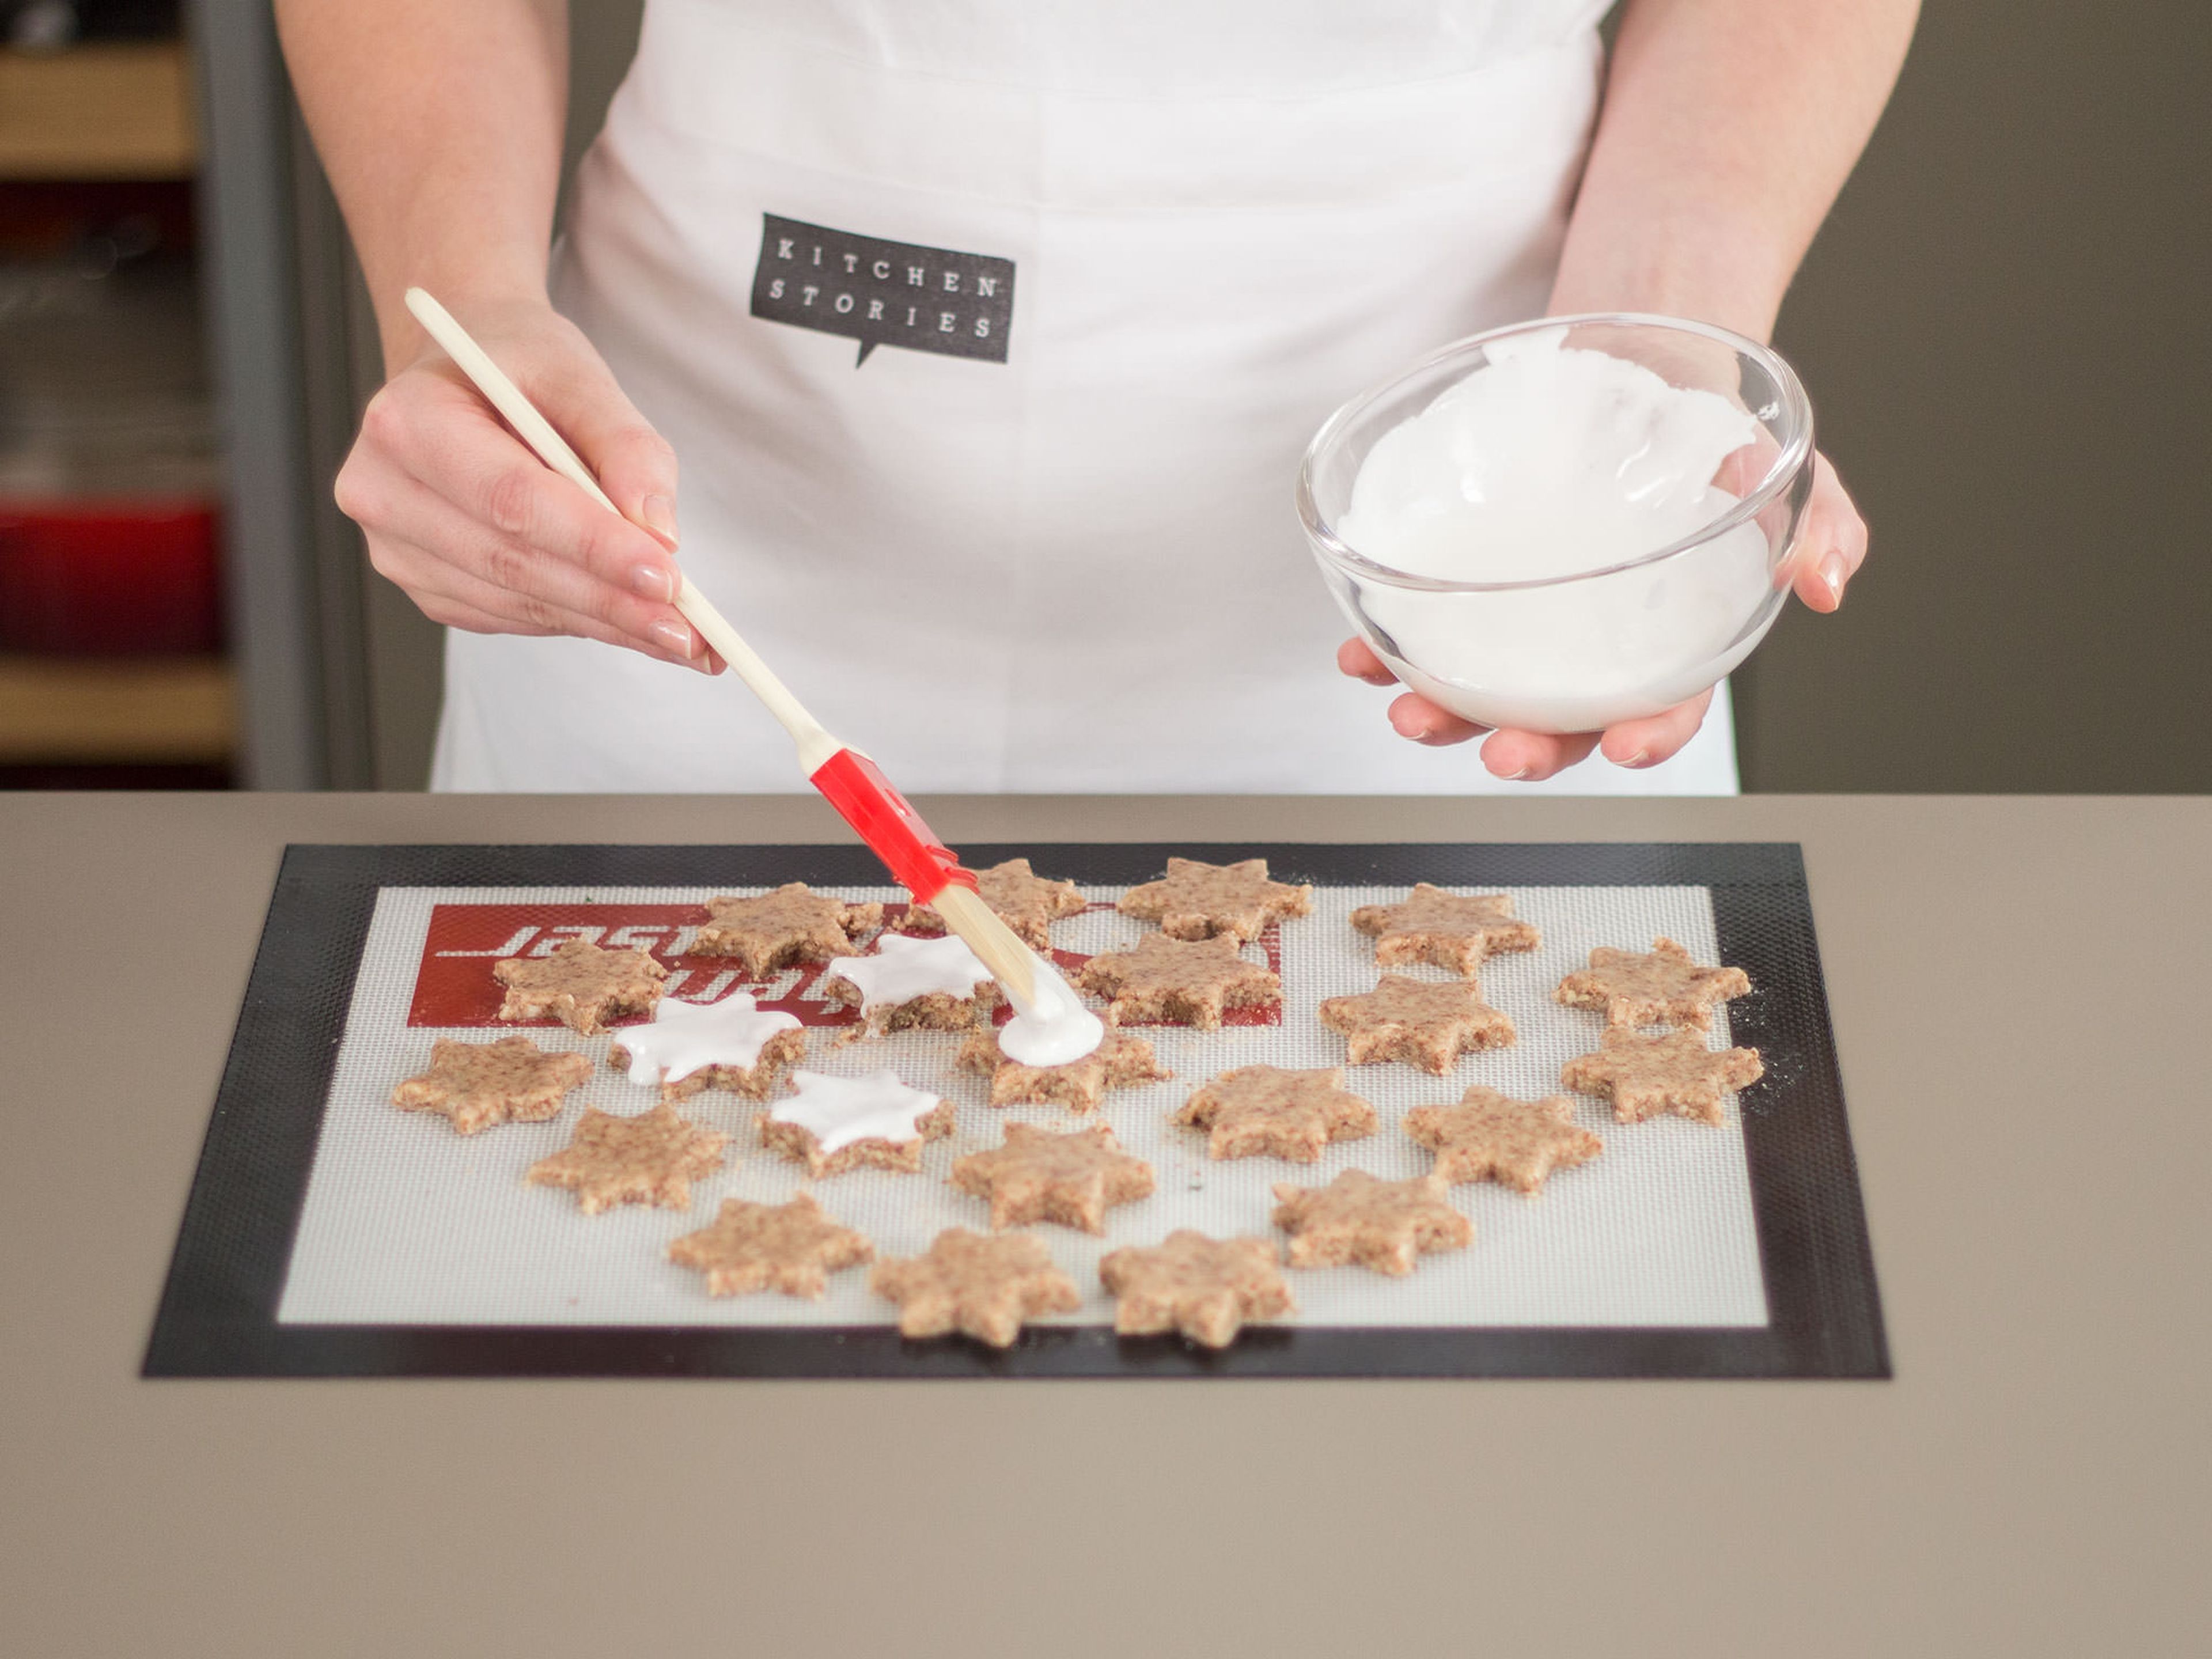 Roll dough out between some plastic wrap to avoid sticking. Using a cookie cutter, cut out star-shaped cookies and transfer to a lined baking sheet. Brush with meringue and bake in preheated oven at 150°C/300°F for approx. 15 – 20 min.